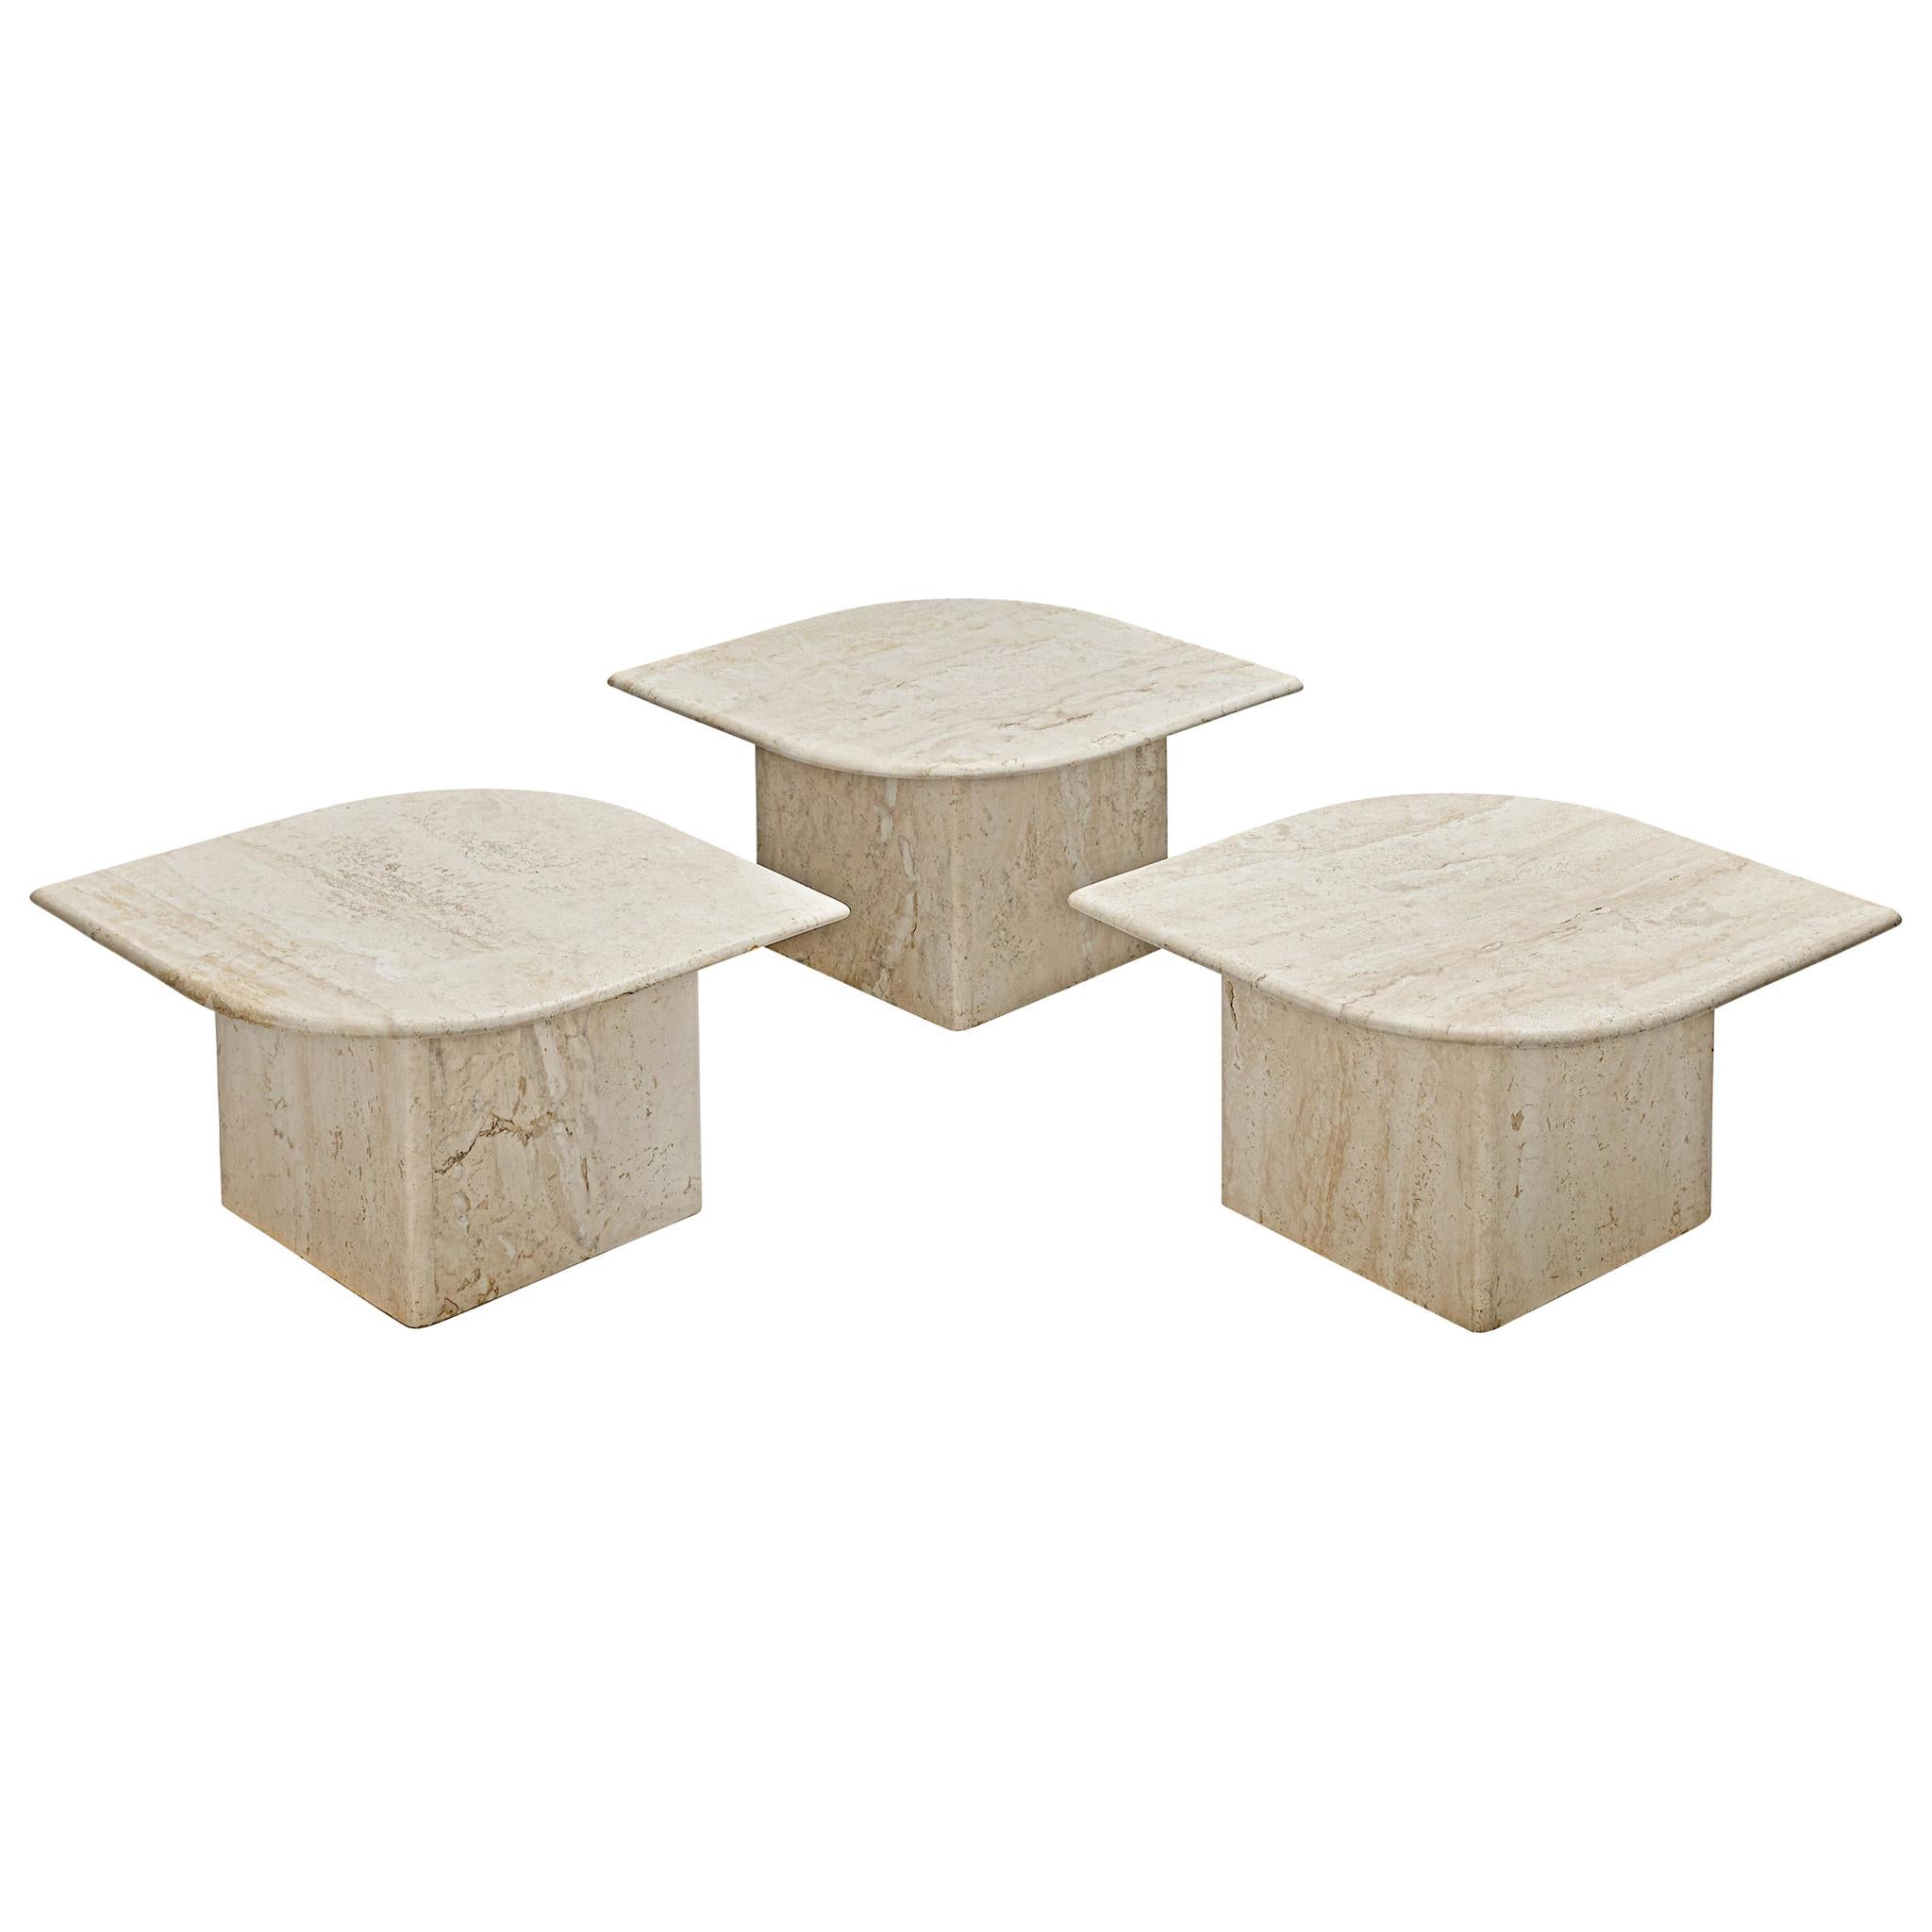 Set of Three Travertine Coffee Tables with Leaf Shaped Tops